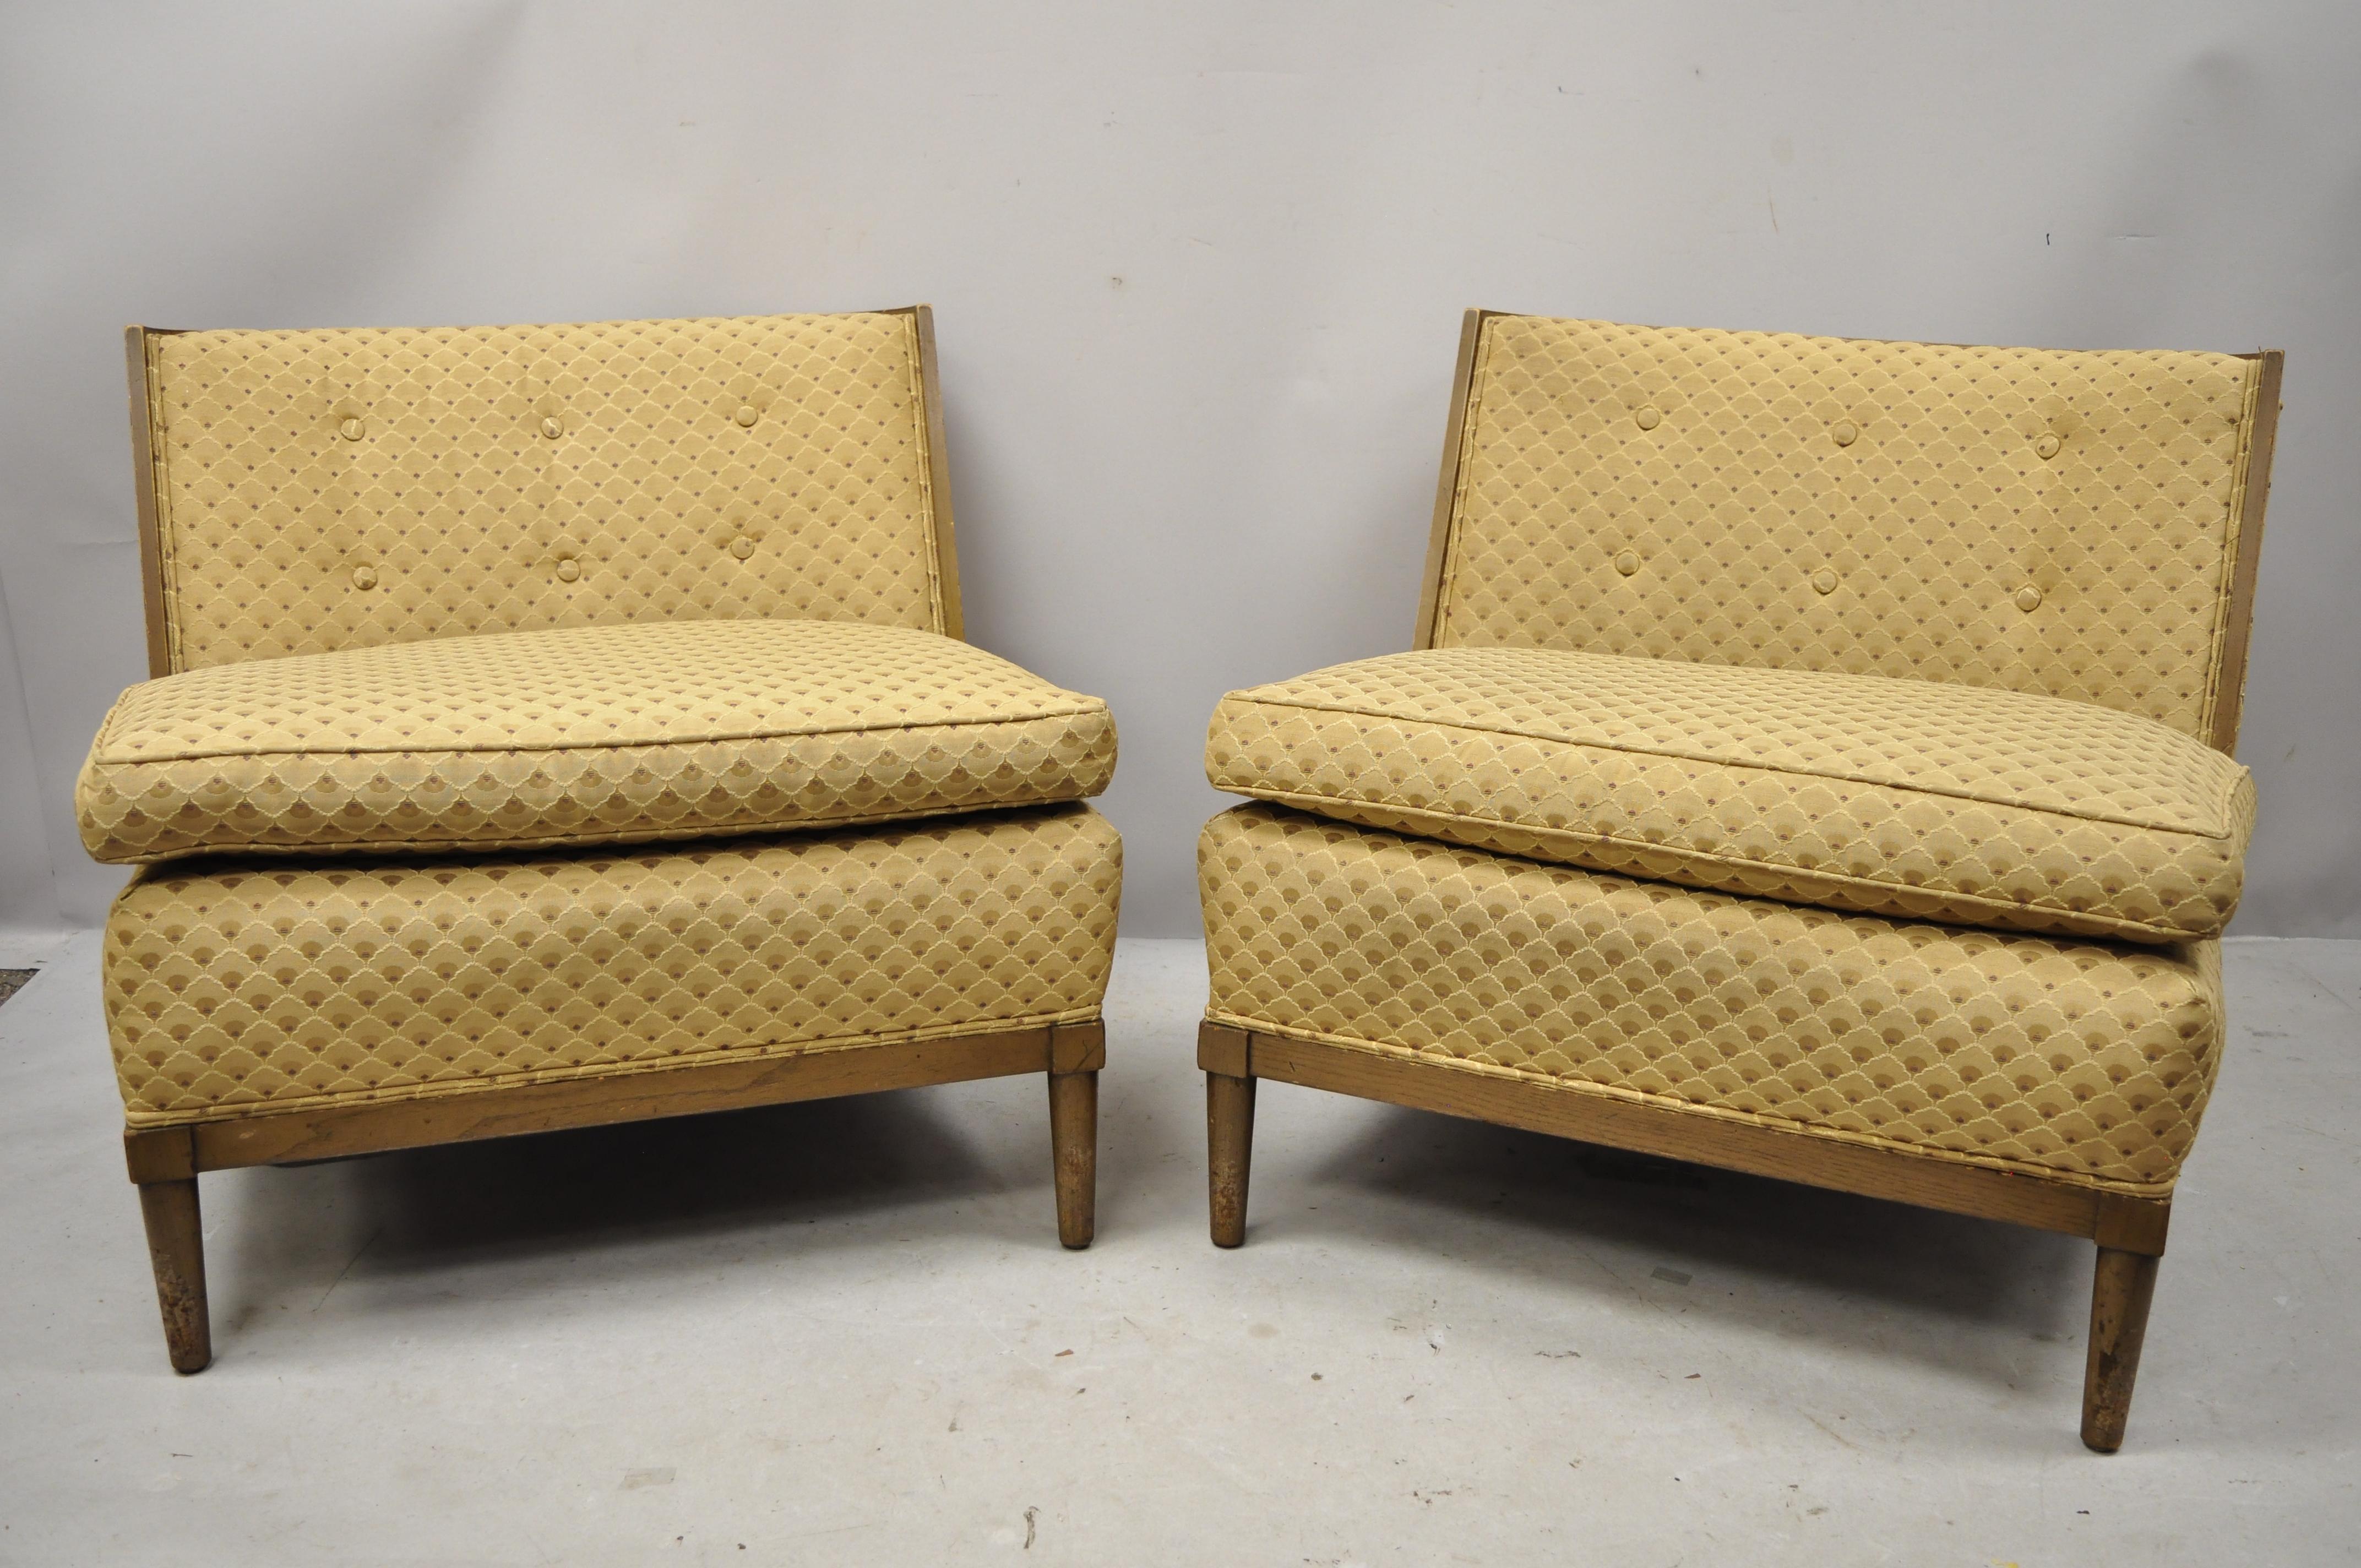 Mid-20th century modern Paul McCobb style barrel back slipper lounge chairs, a pair. Item features nice wide frames, barrel backs, solid wood construction, clean modernist lines, circa mid-20th century. Measurements: 28